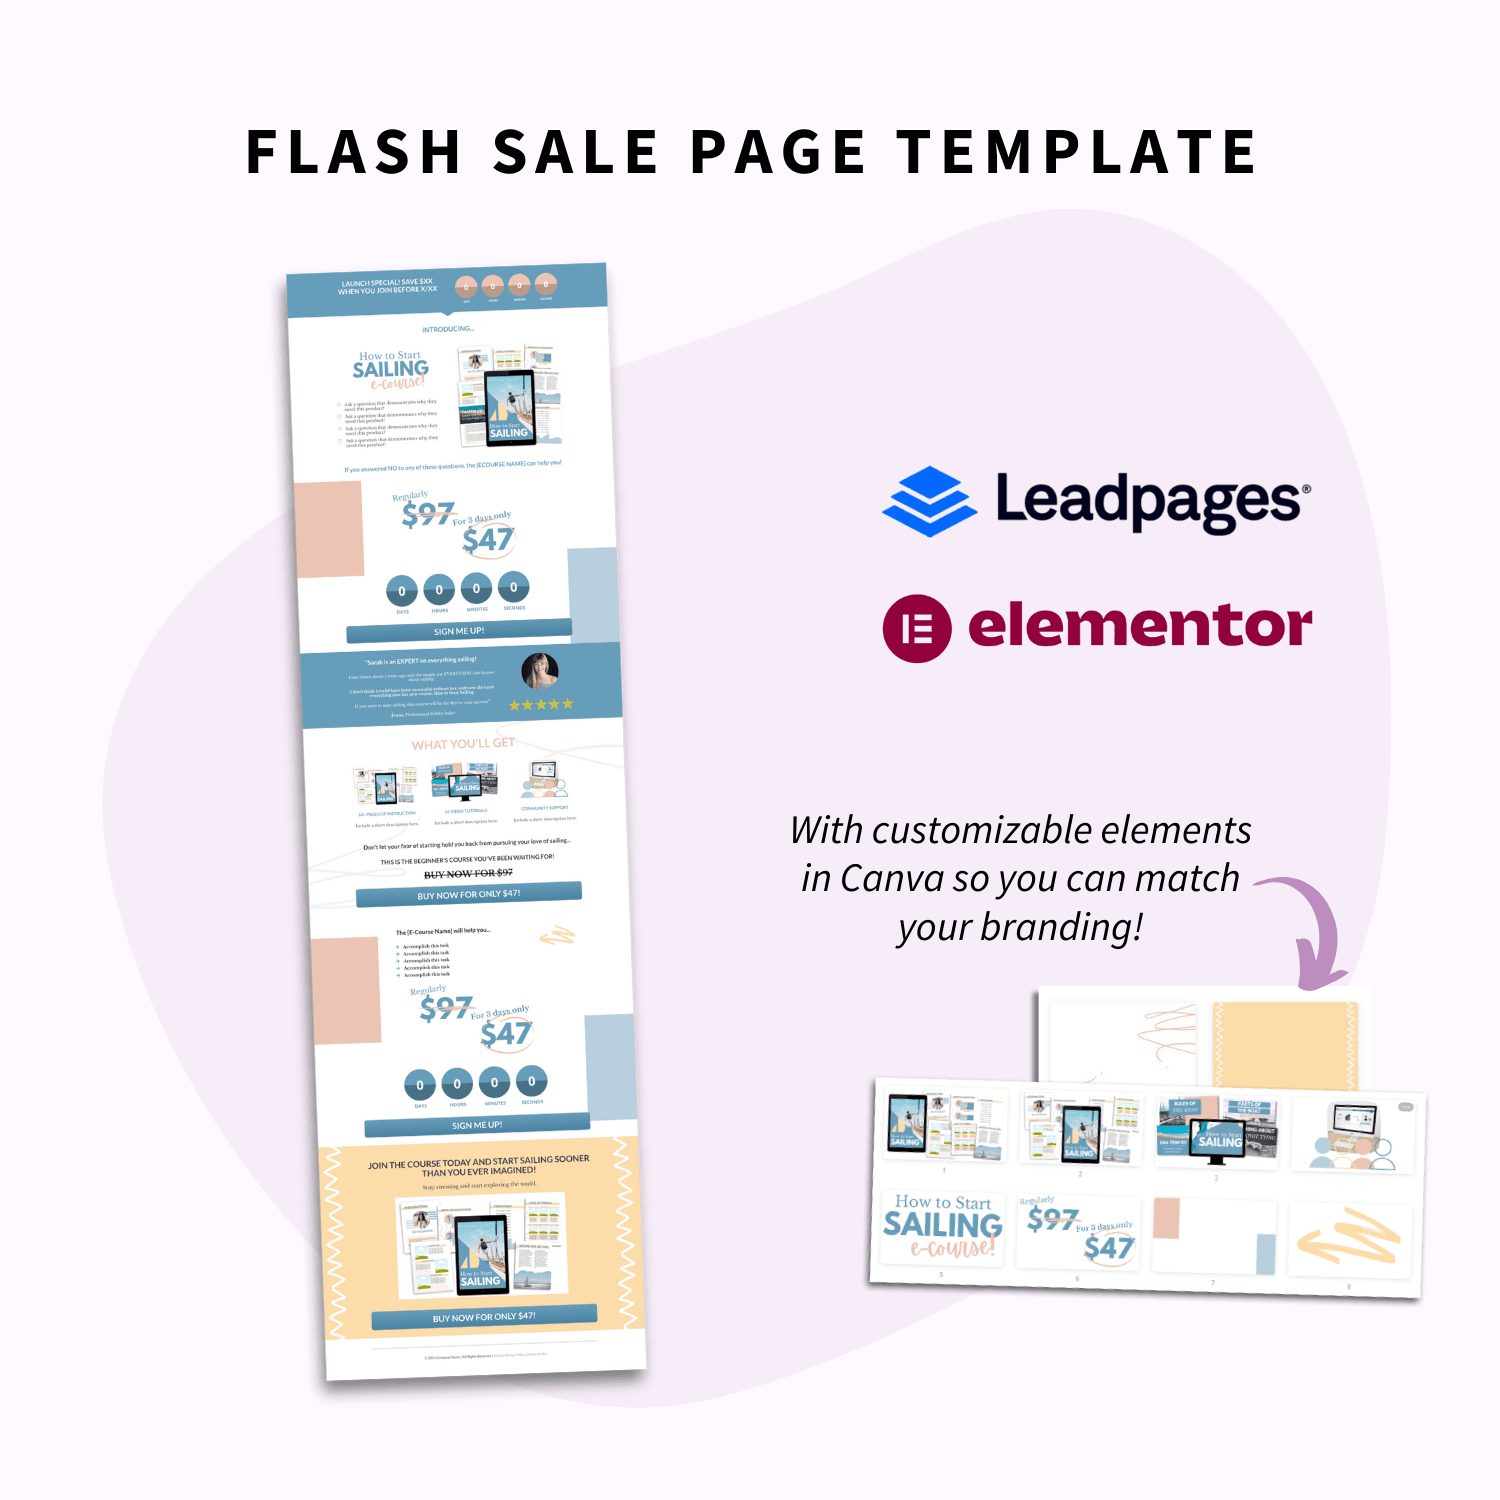 Flash Sale Page Template in the Create and Execute an Easy Flash Sale Toolbox